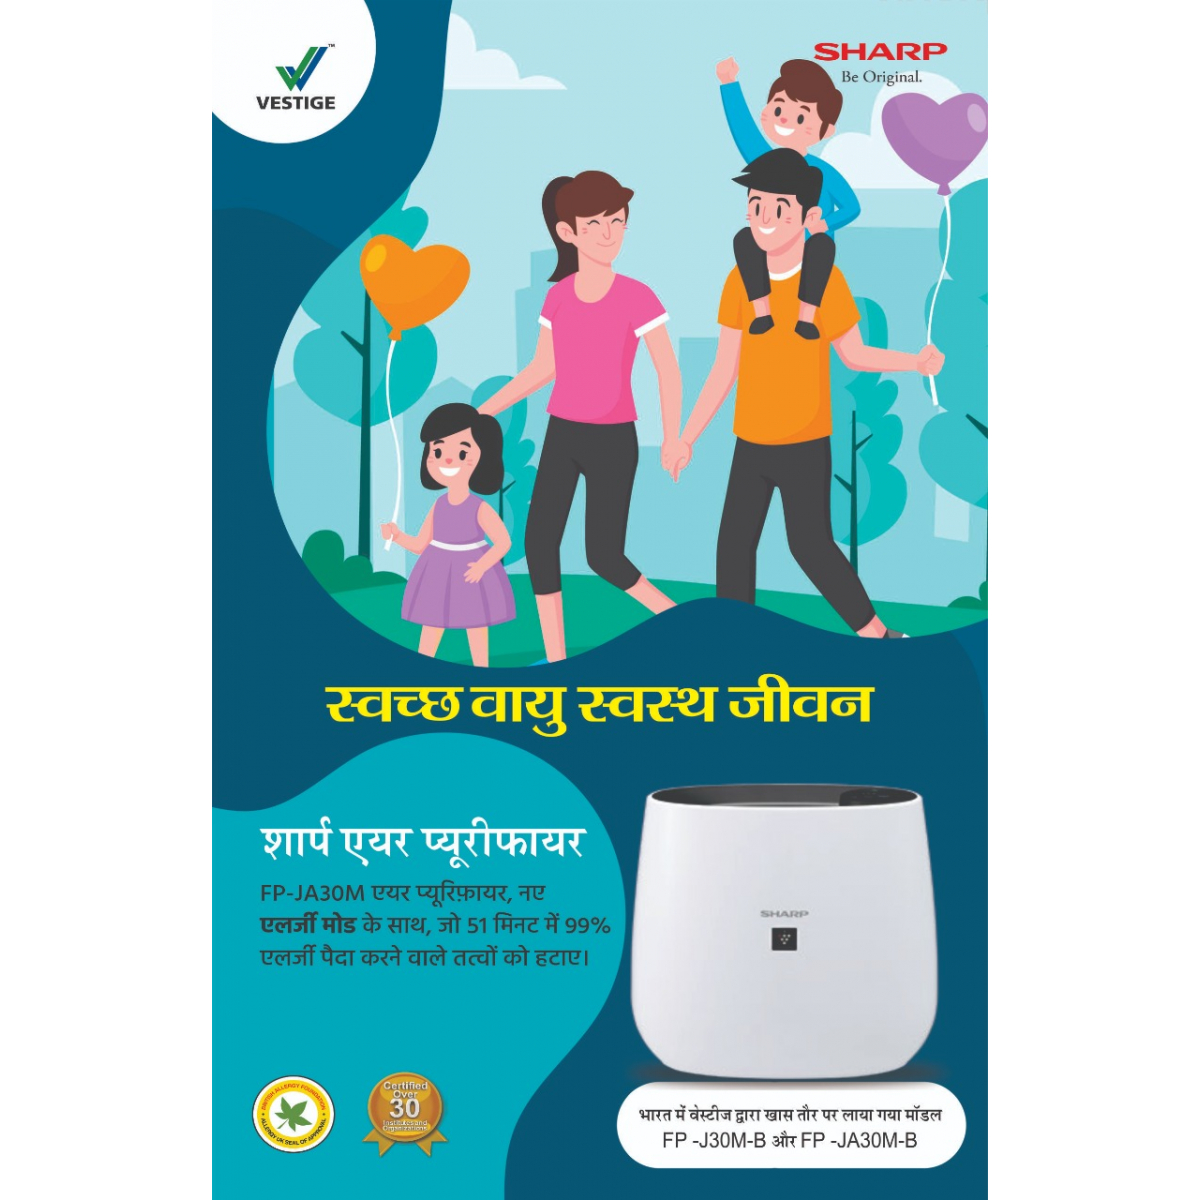 Air Purifier Broucher Hindi - Pack Of 10 Leafs